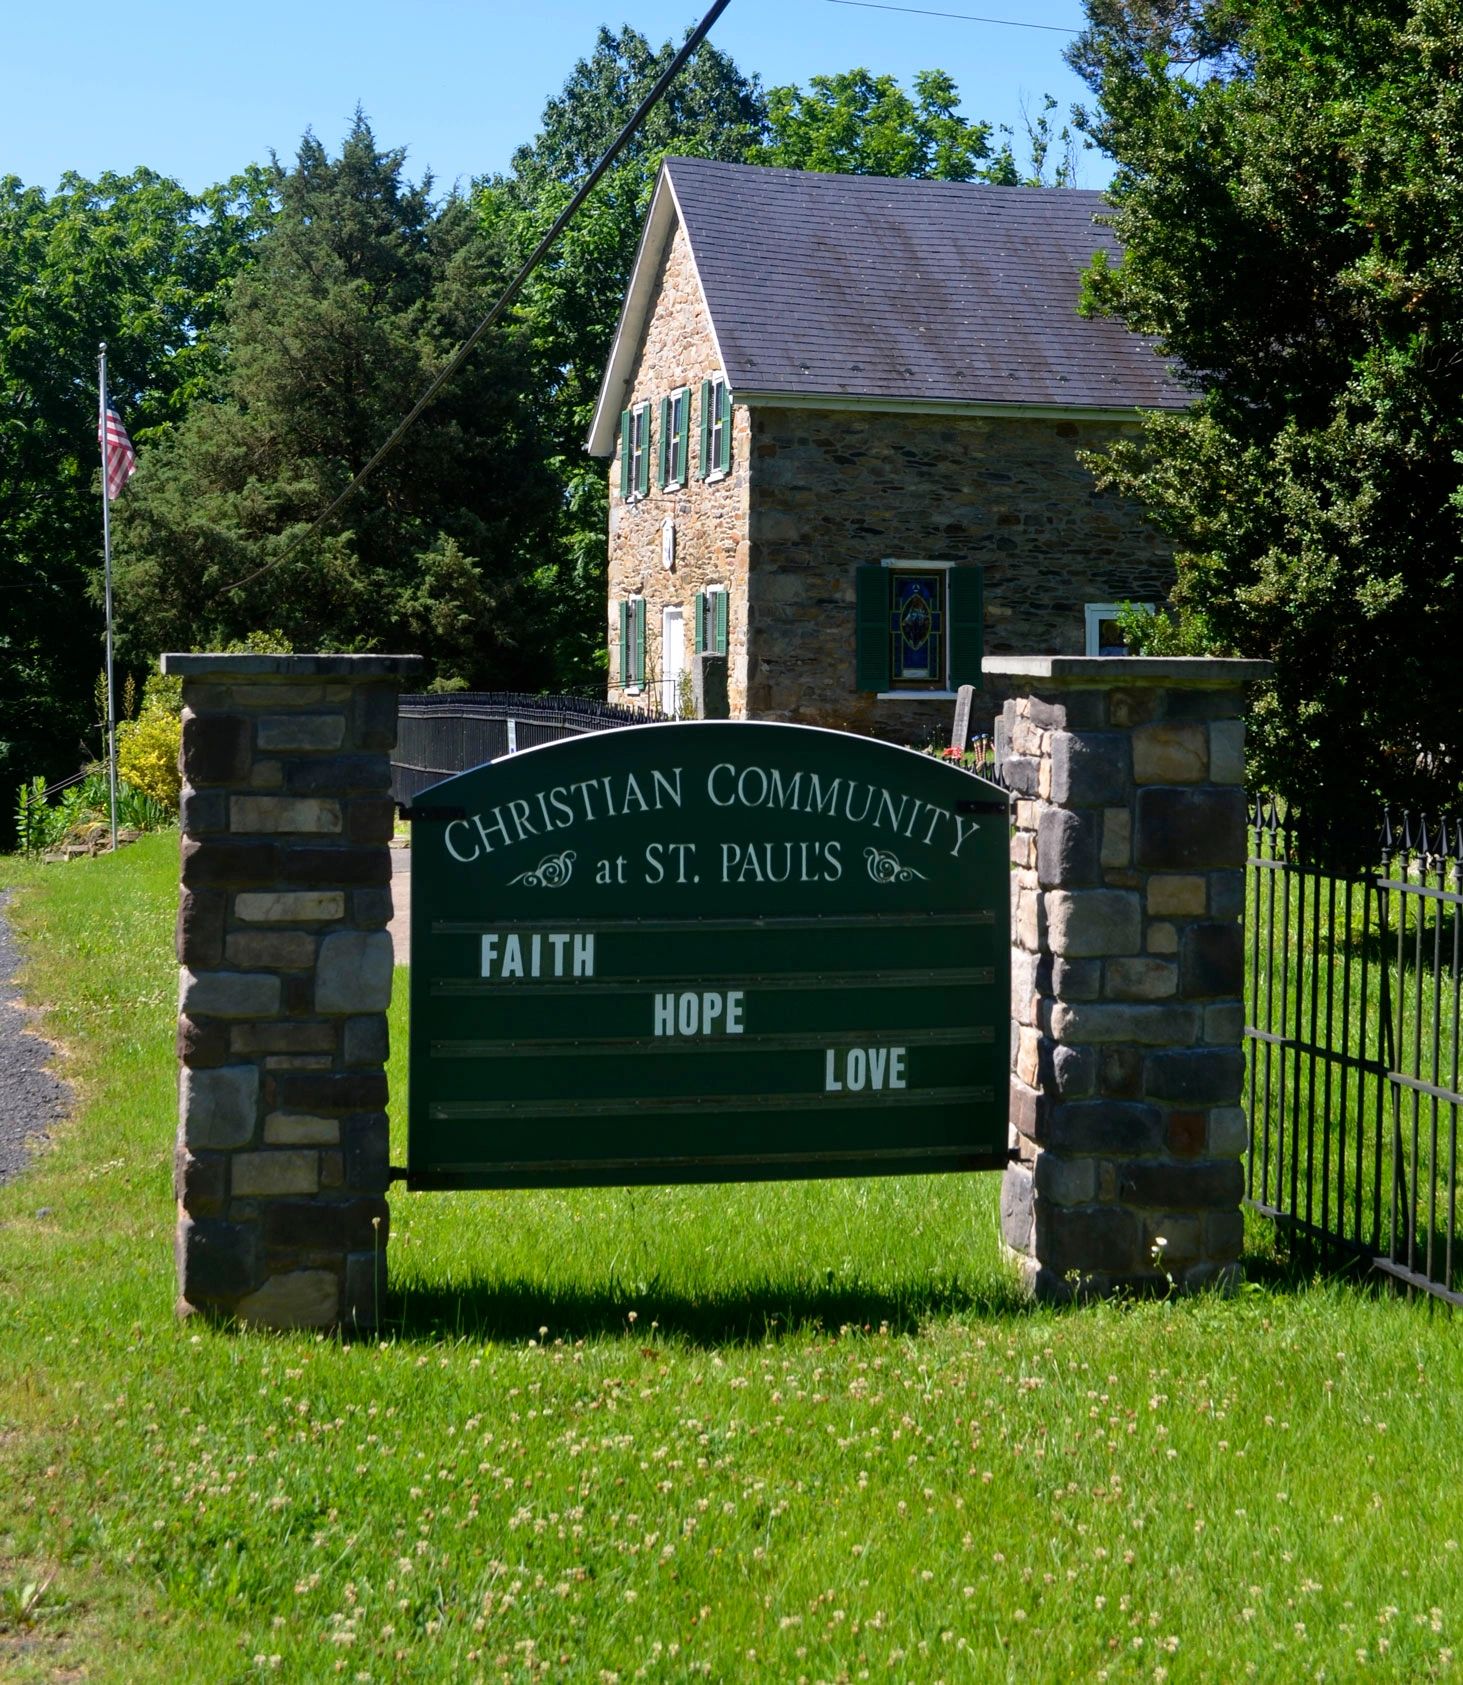 Faith, Hope, and Love sign  in front of the Christian Community Church at St. Paul's.